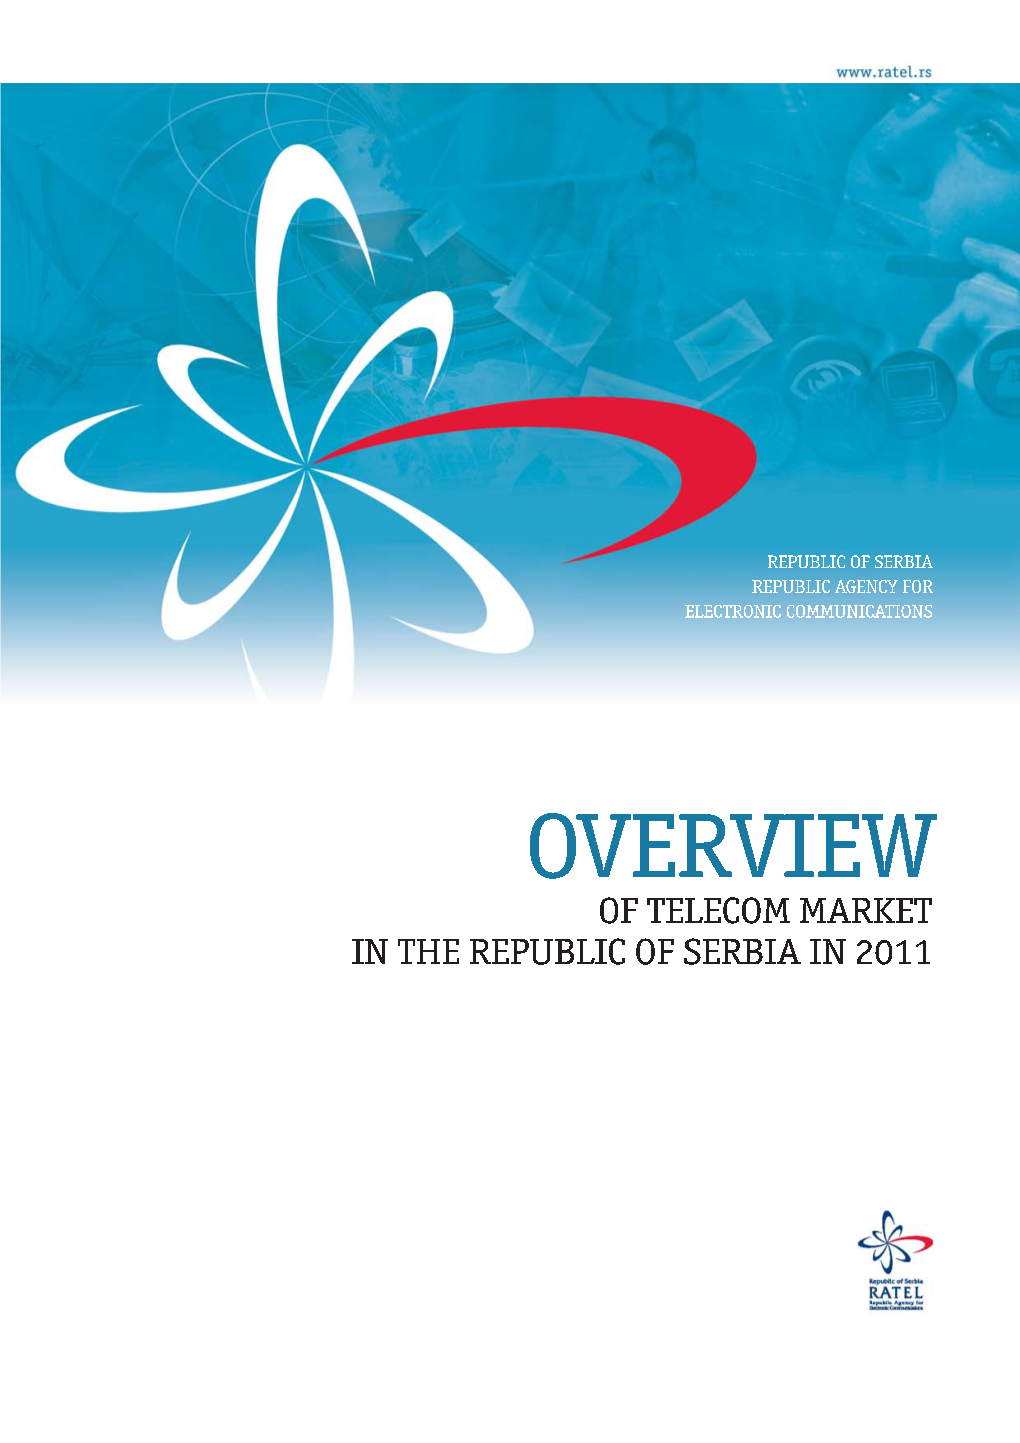 An Overview of Telecom Market in the Republic of Serbia in 2011